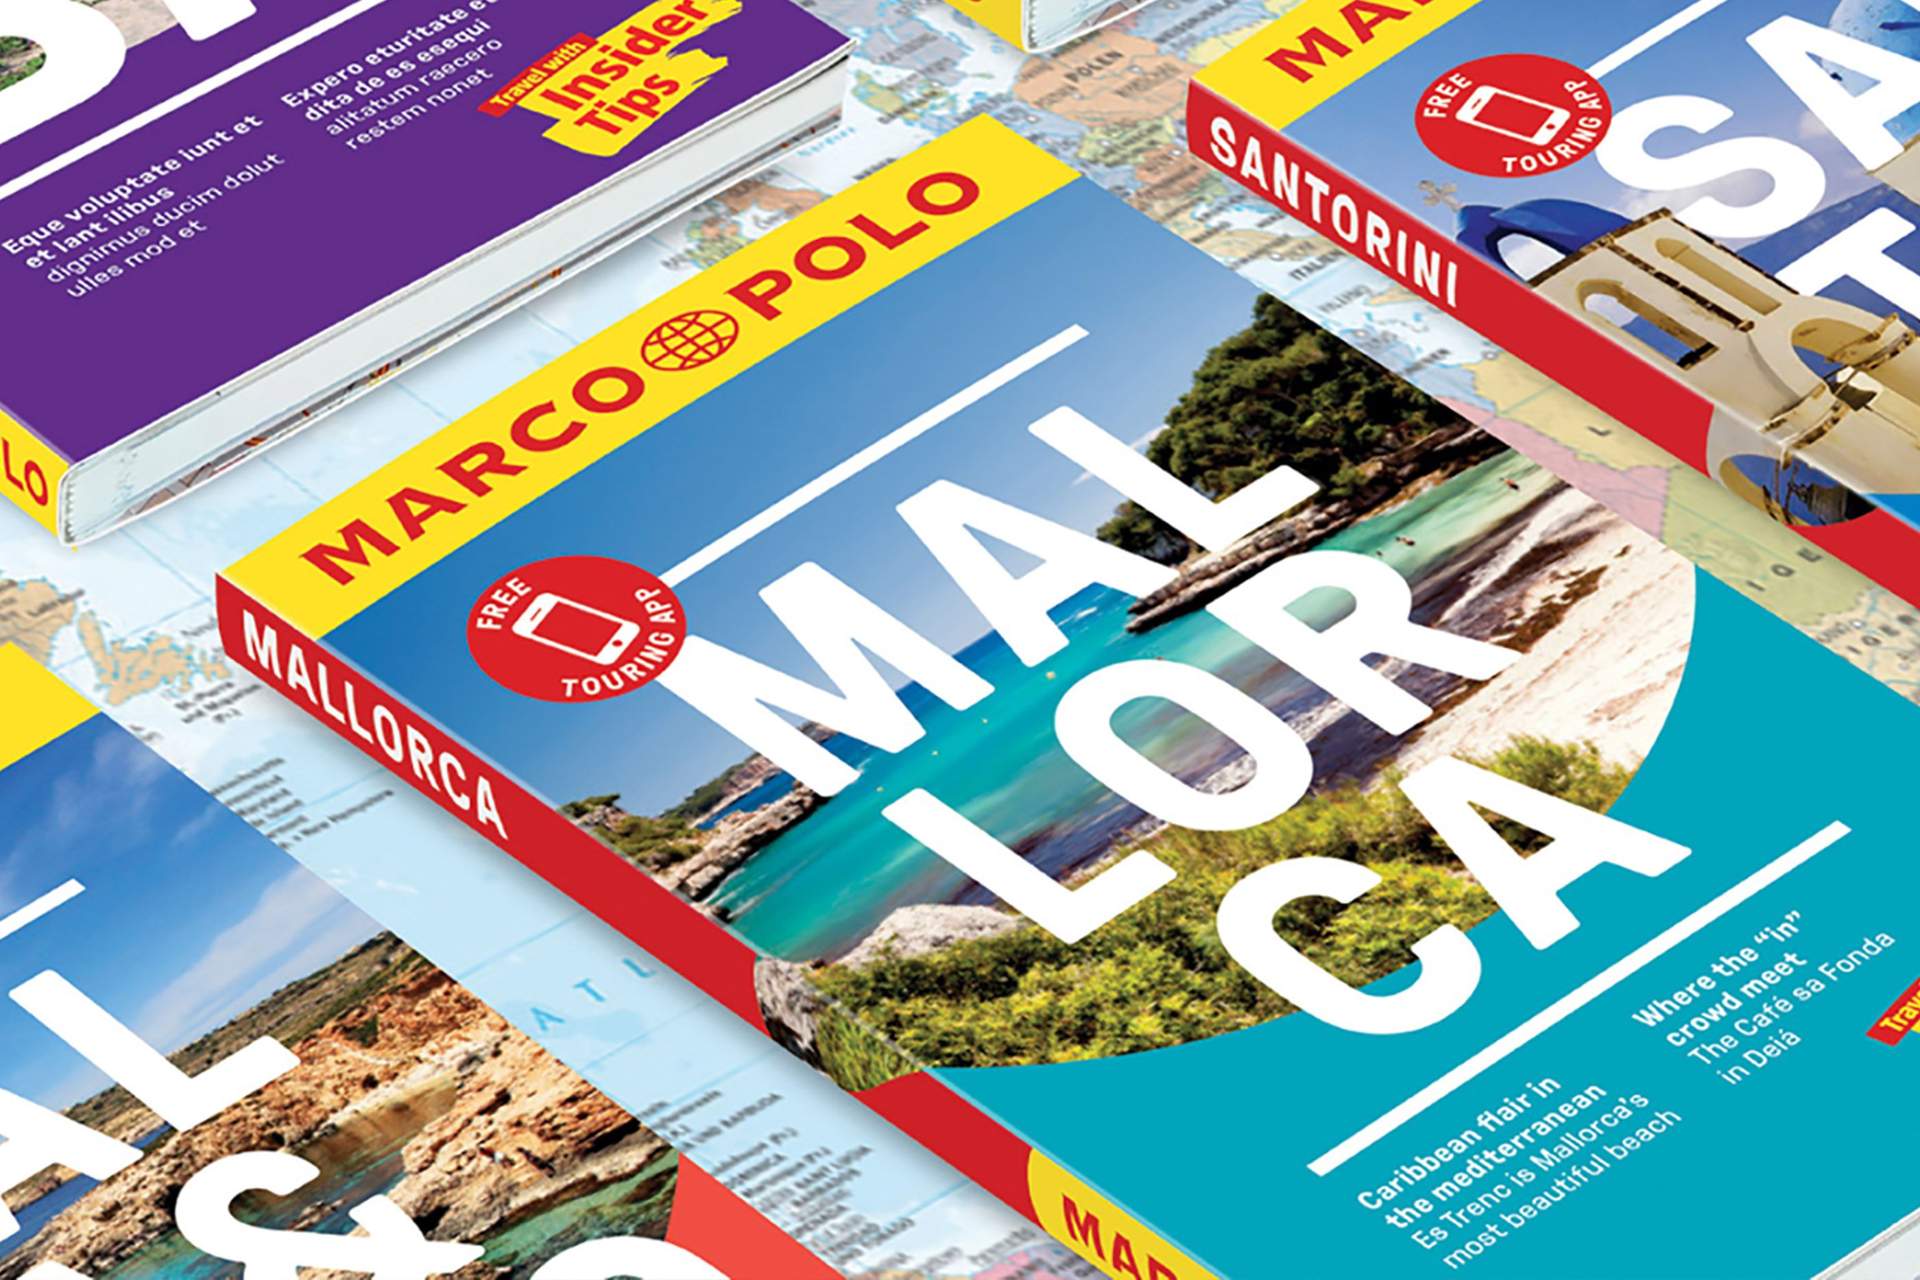 travel guides latest series